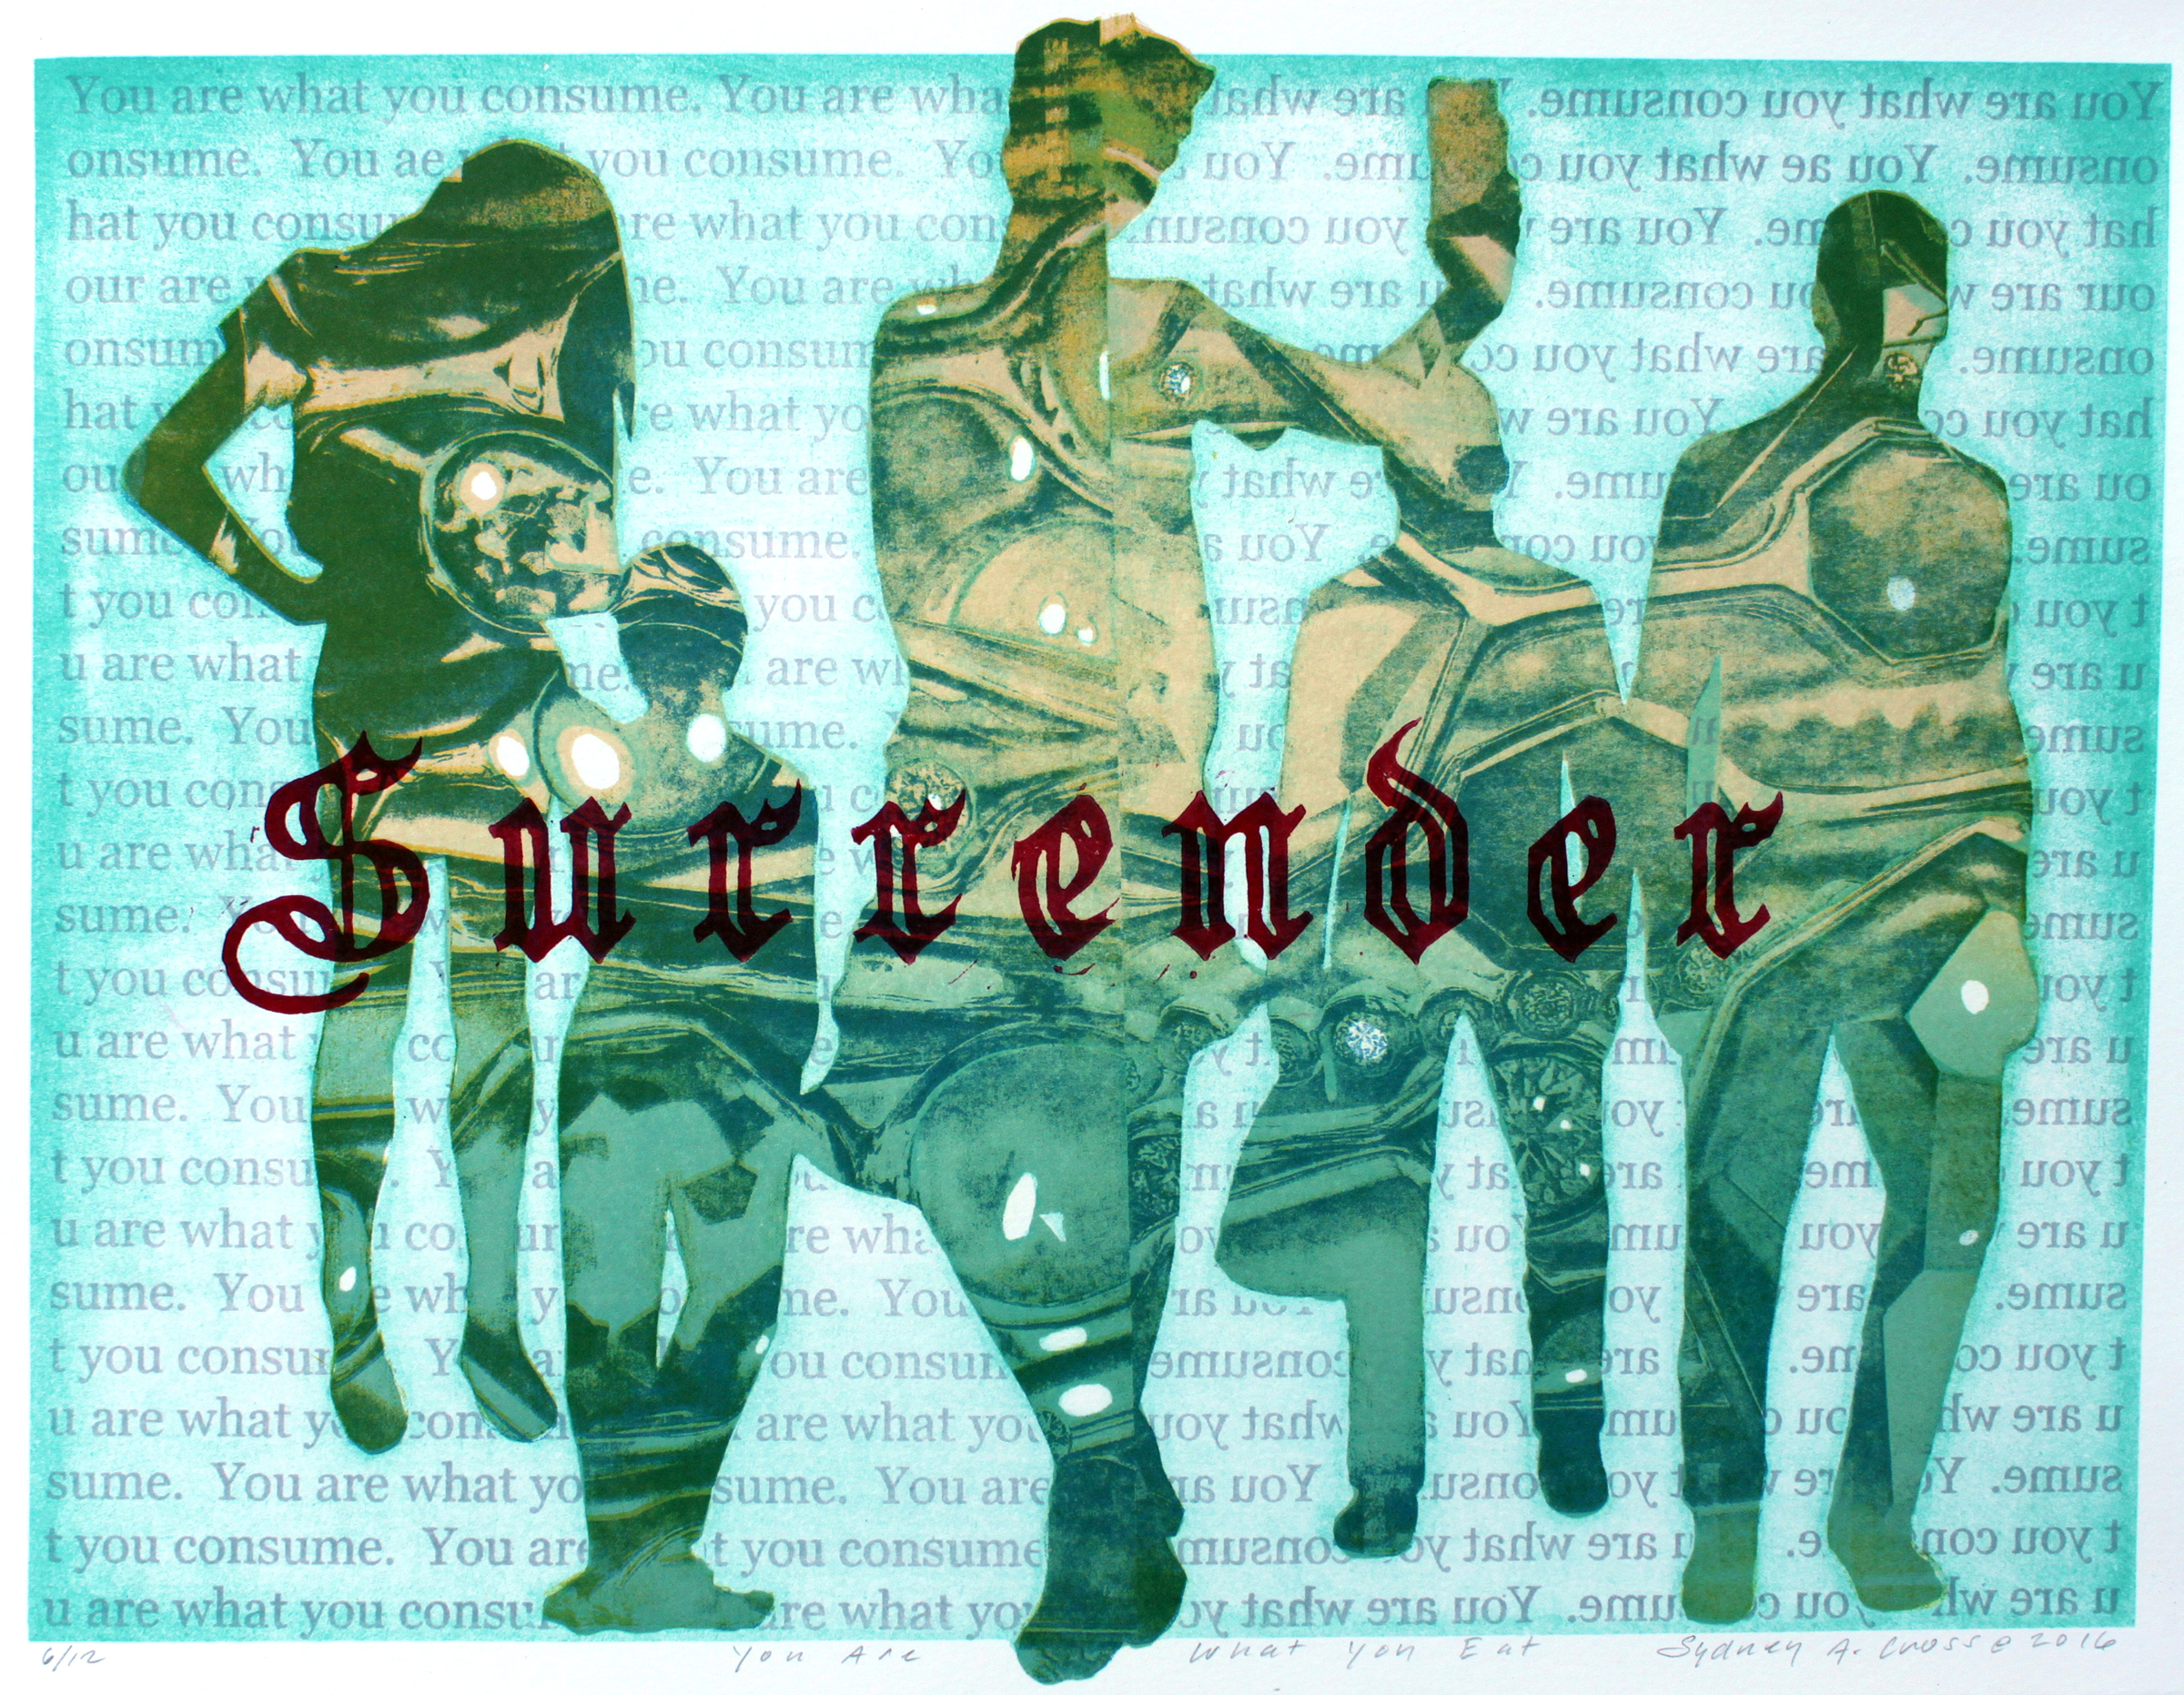 The word "surrender" sits atop imagery filled human silhouettes referencing consumption. In the background is text repeating the phrase "You are what you consume" foreward & backward